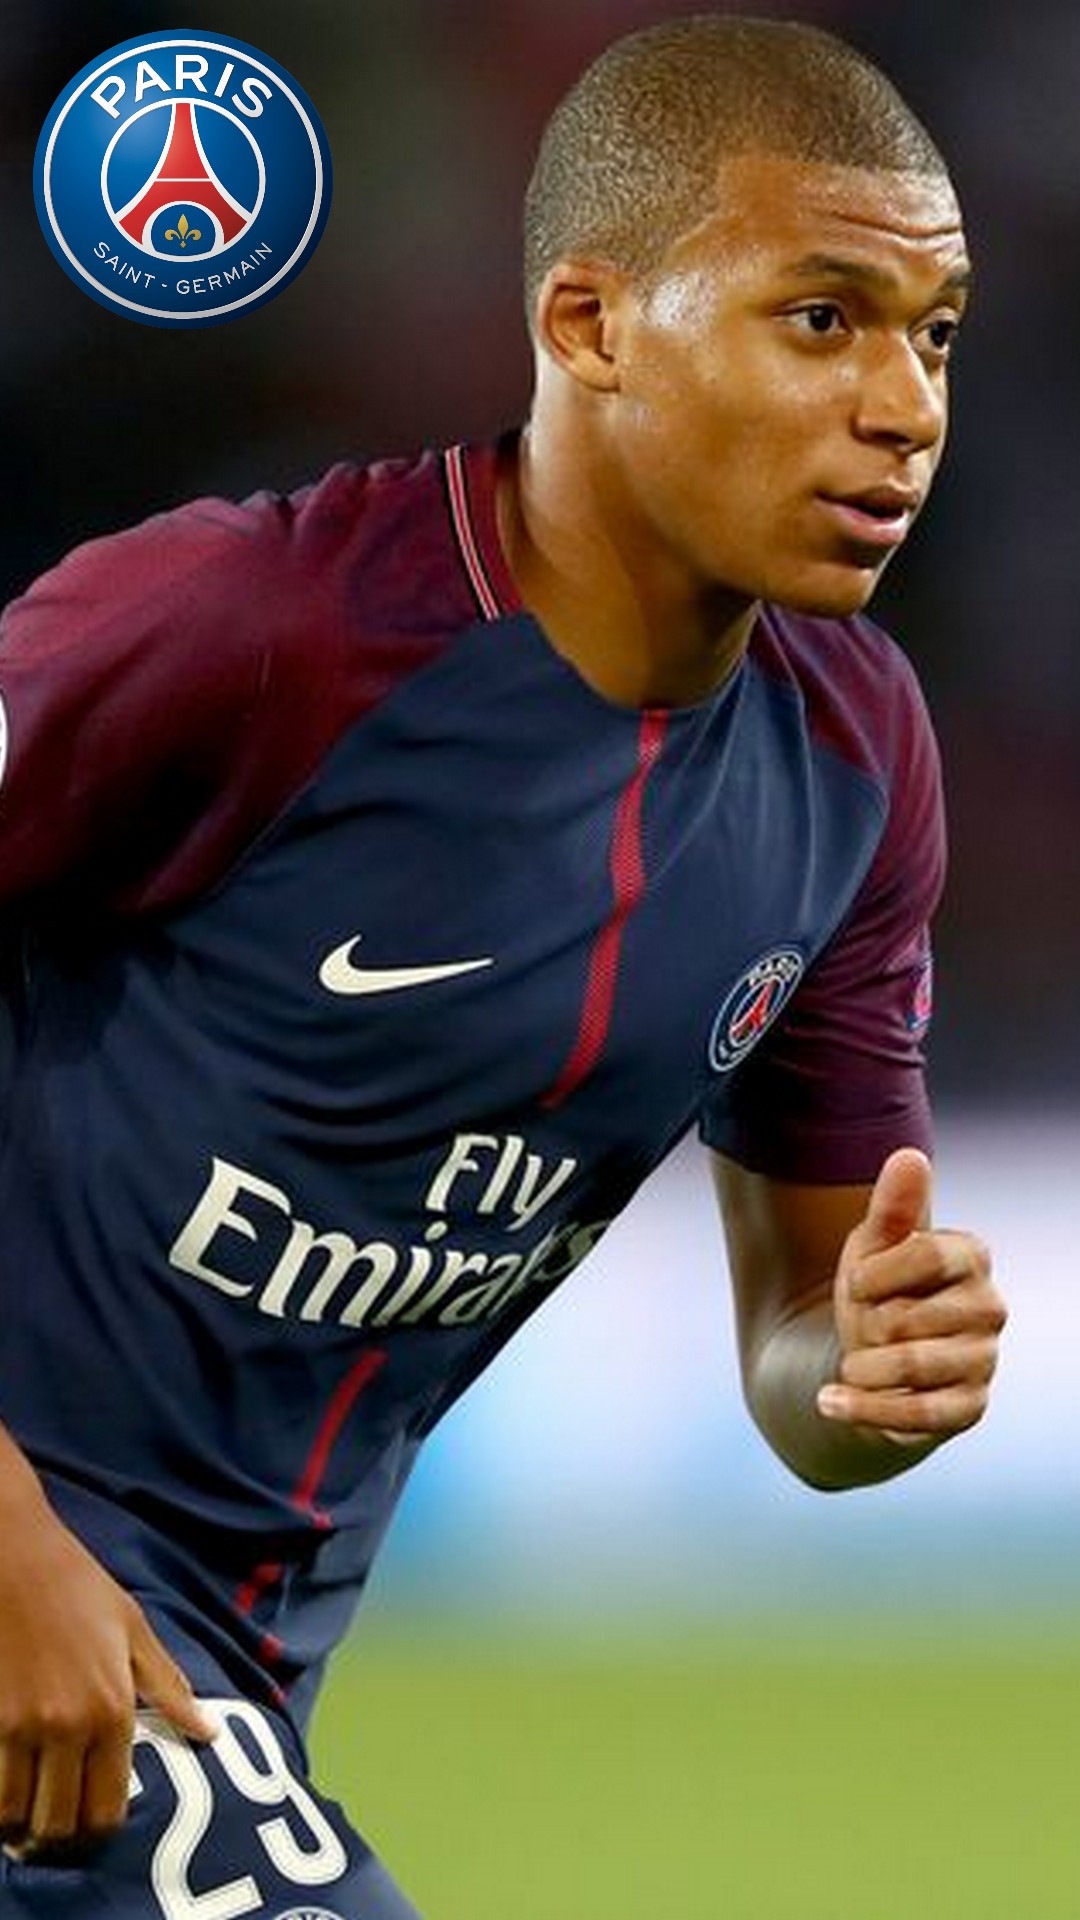 Mbappe Paris Saint-Germain iPhone Wallpapers With Resolution 1080X1920 pixel. You can make this wallpaper for your Mac or Windows Desktop Background, iPhone, Android or Tablet and another Smartphone device for free